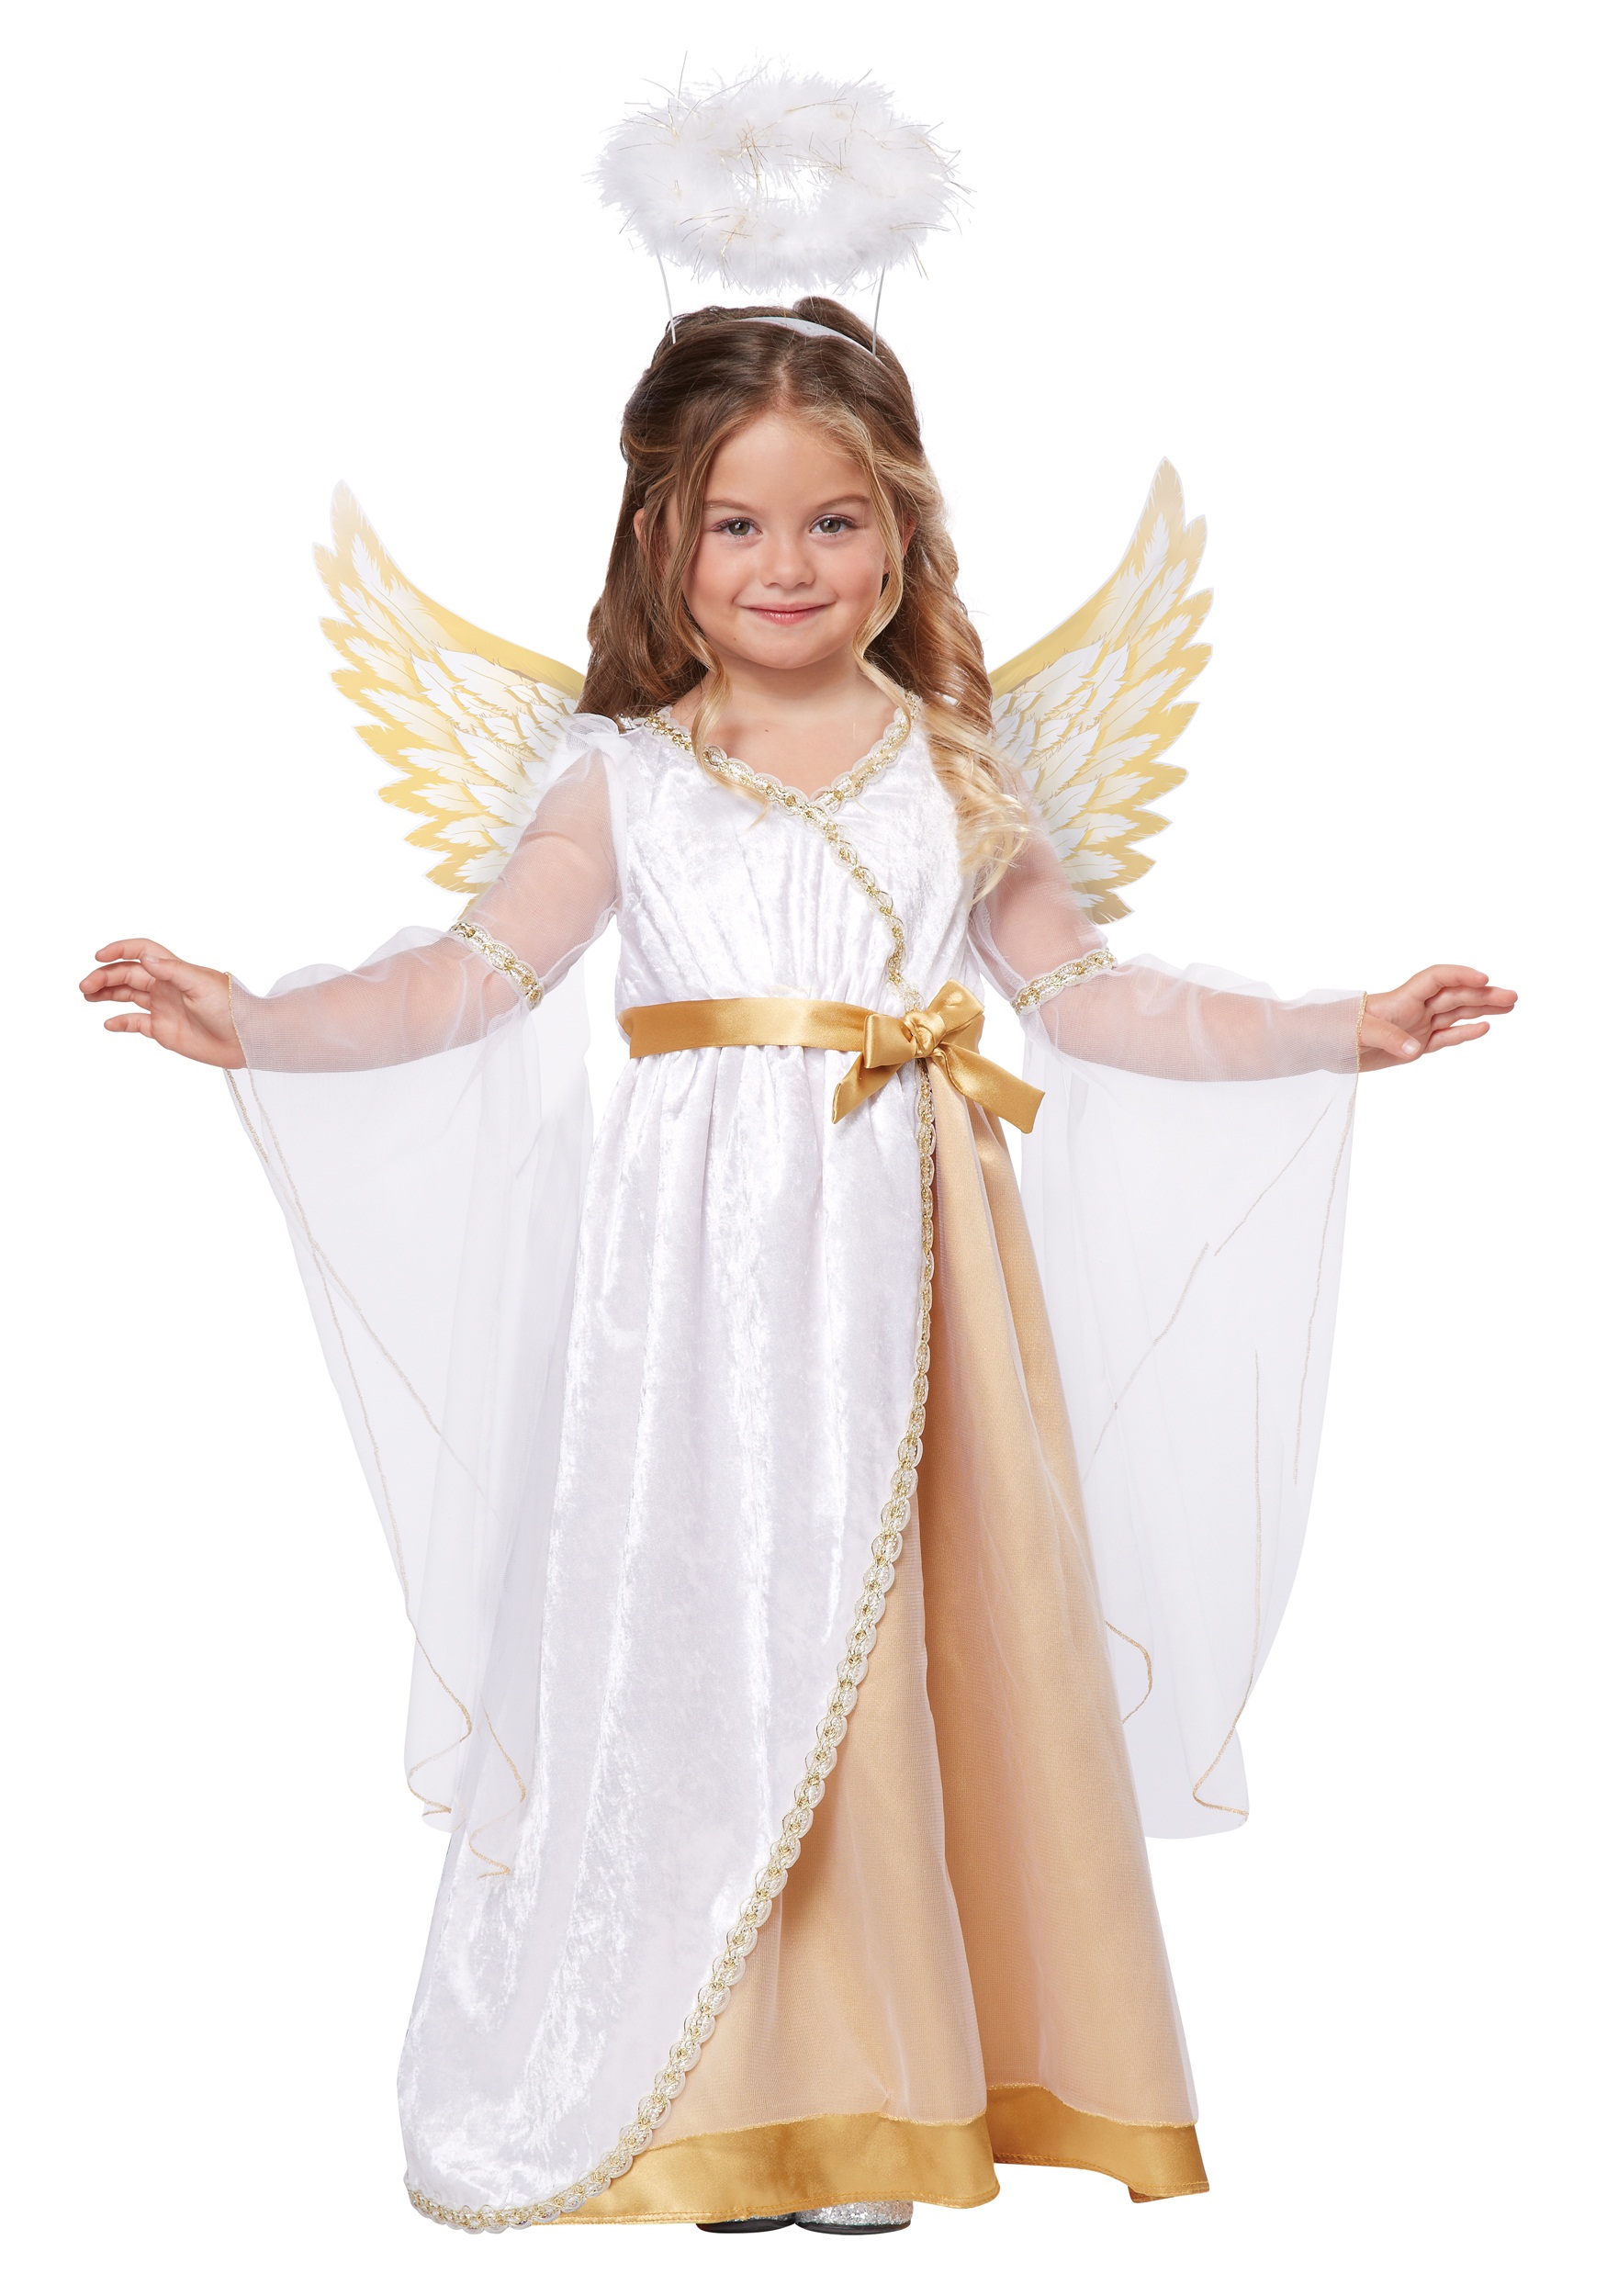 Photos - Fancy Dress California Costume Collection Sweet Little Angel Costume for Toddlers Oran 